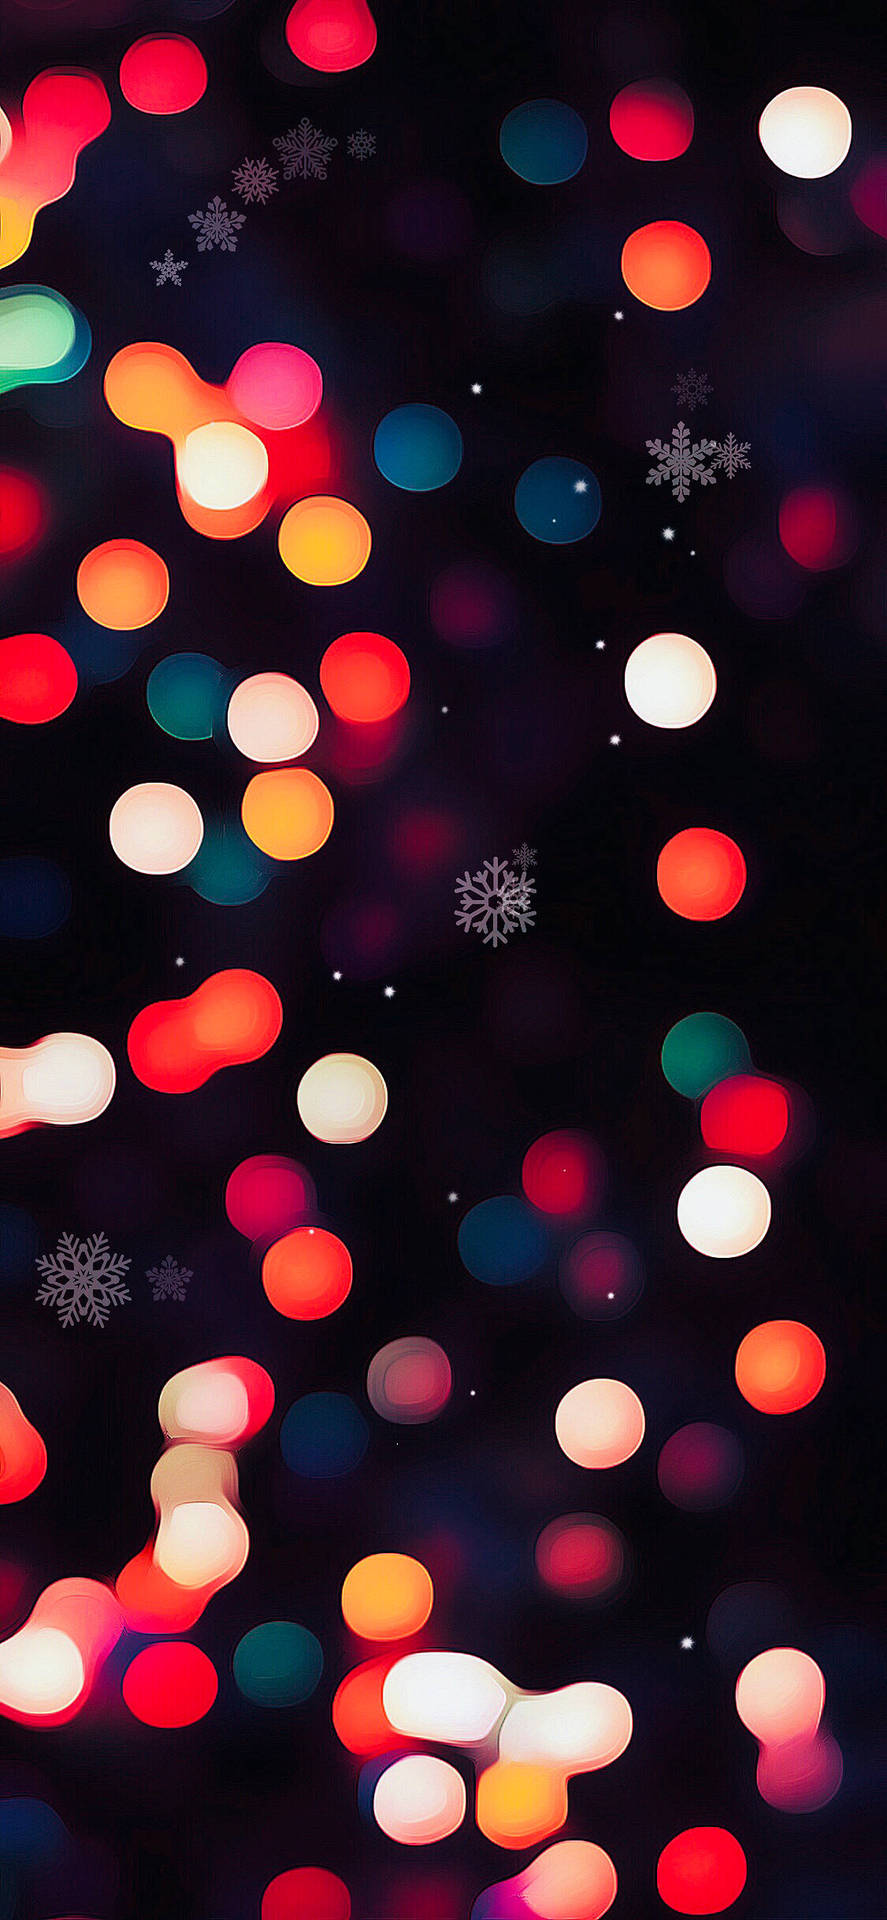 Snowflakes For Aesthetic Christmas Iphone Wallpaper